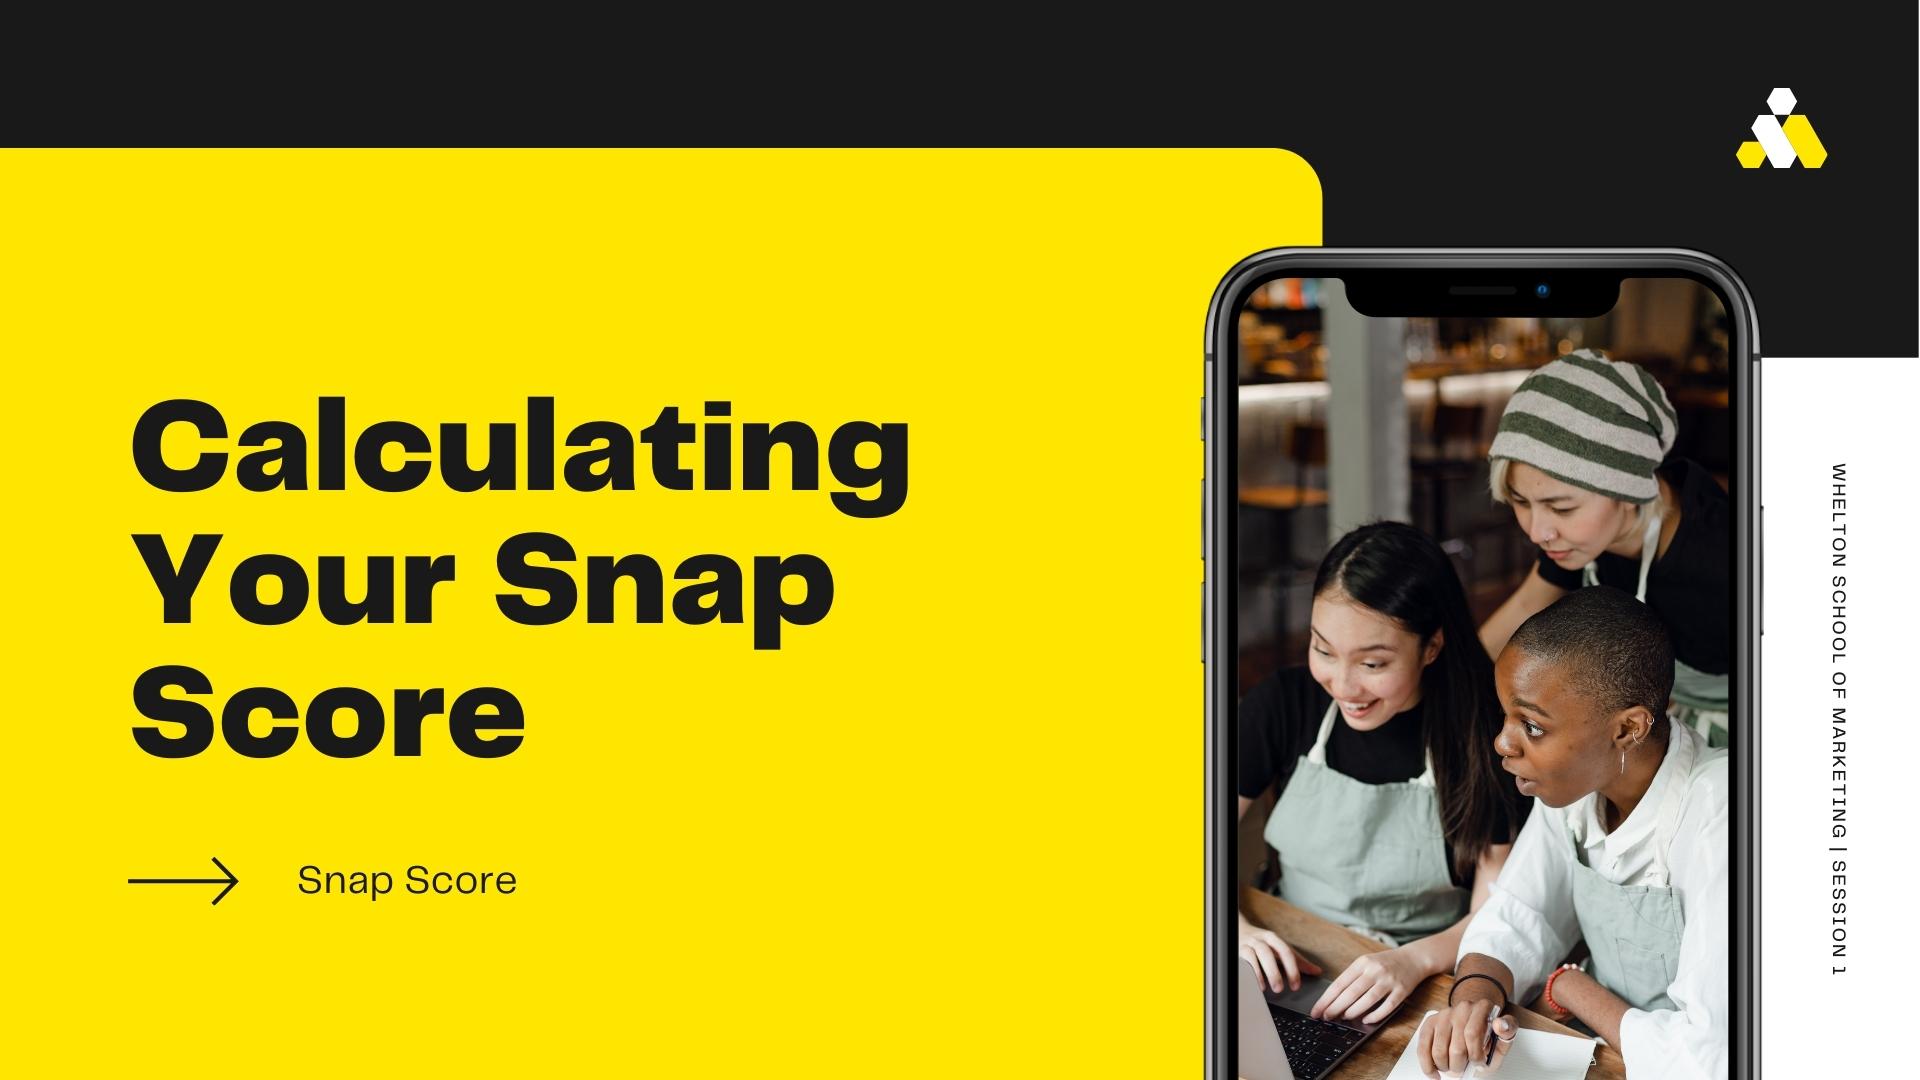 Calculating Your Snap Score